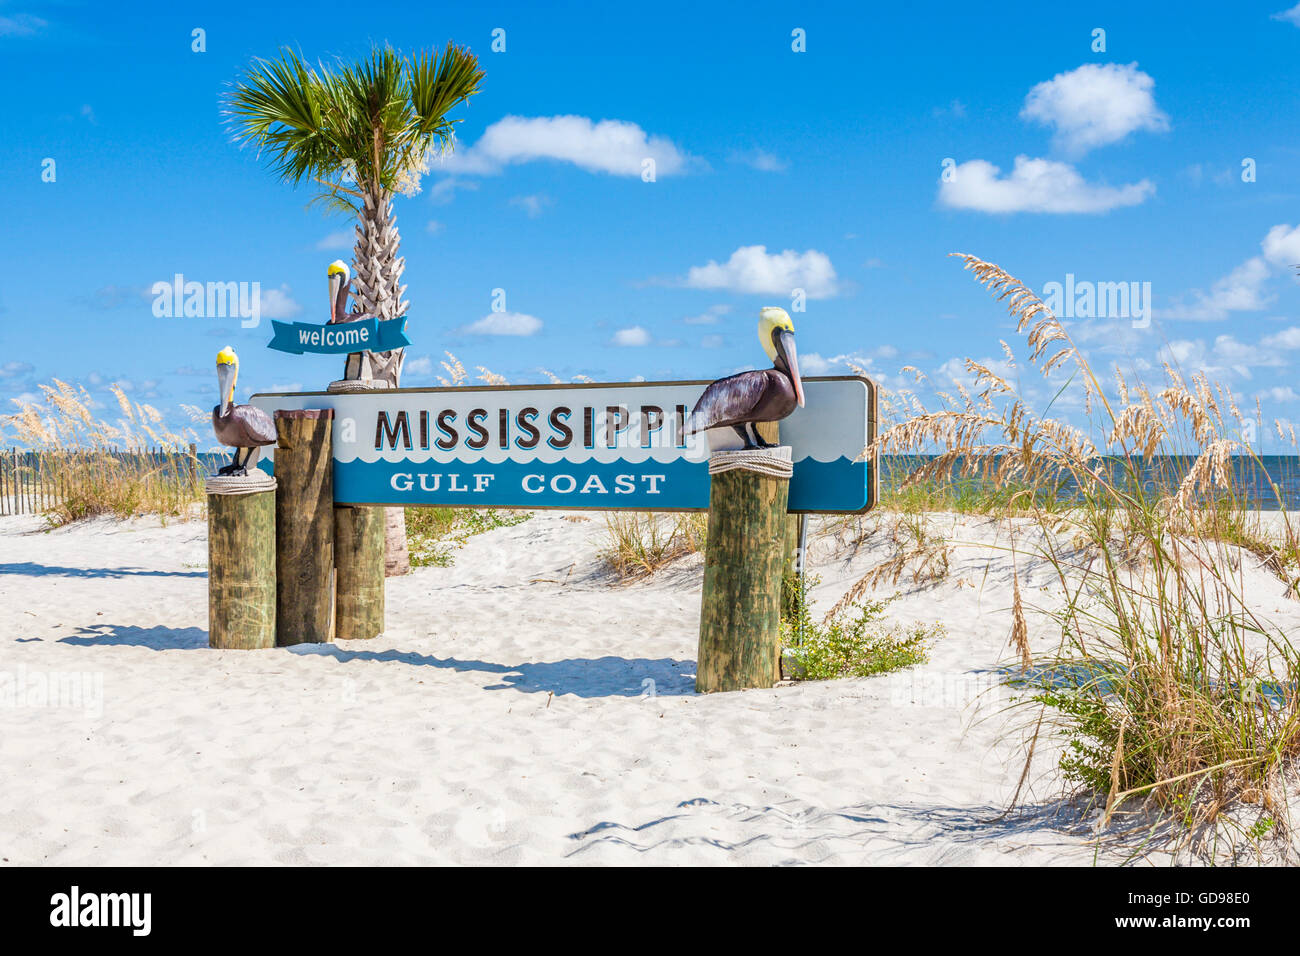 Sign at the beach welcomes visitors to the Mississippi Gulf Coast at Gulfport, Mississippi Stock Photo